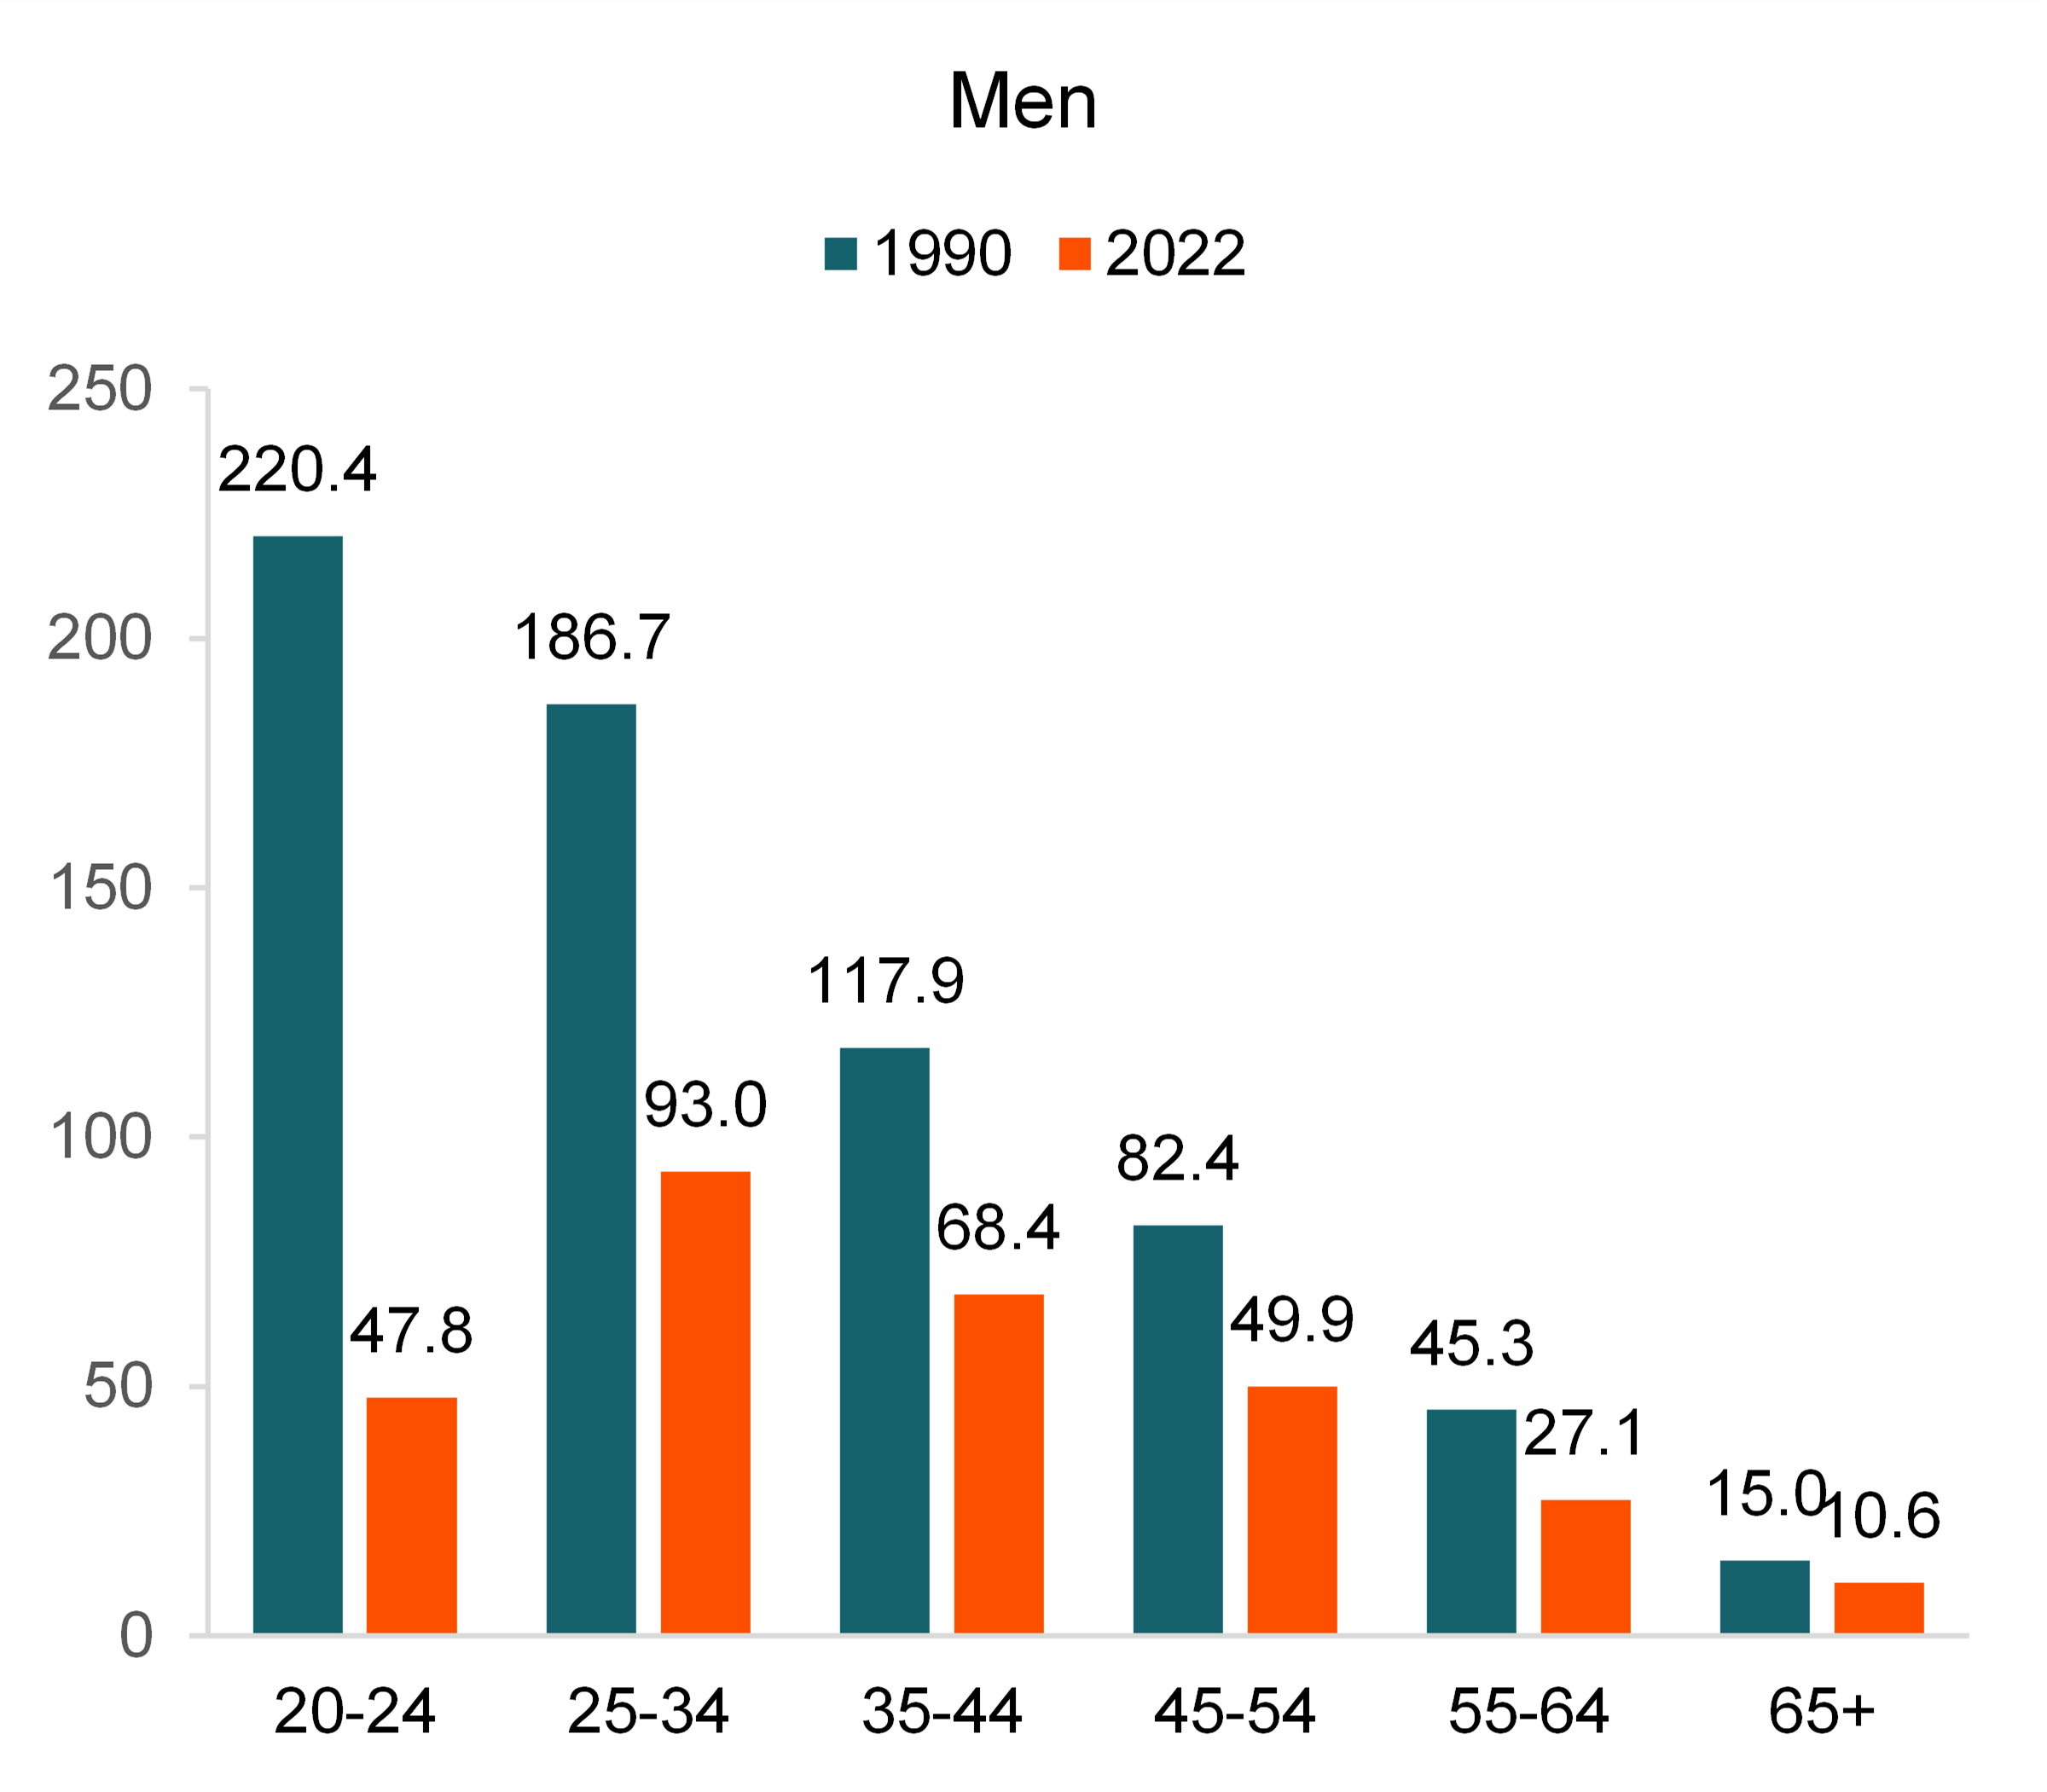 Fig 2. Figure 3. Men’s Remarriage Rates by Age Groups, 1990 & 2022